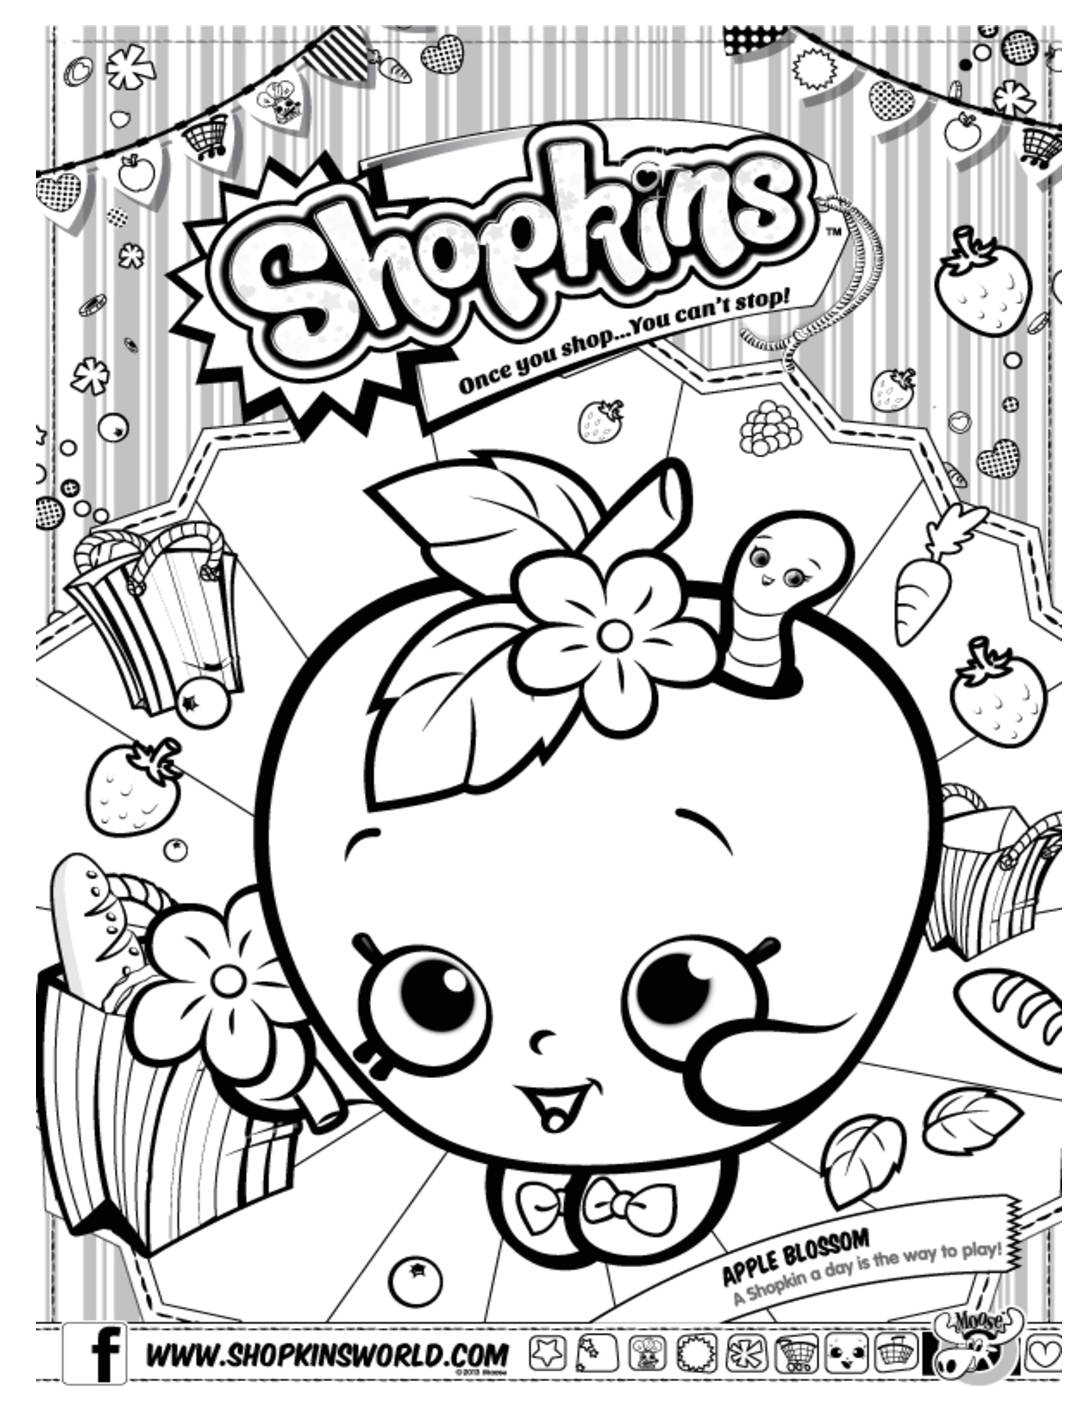 Shopkins Coloring Page 6 Coloring Pages